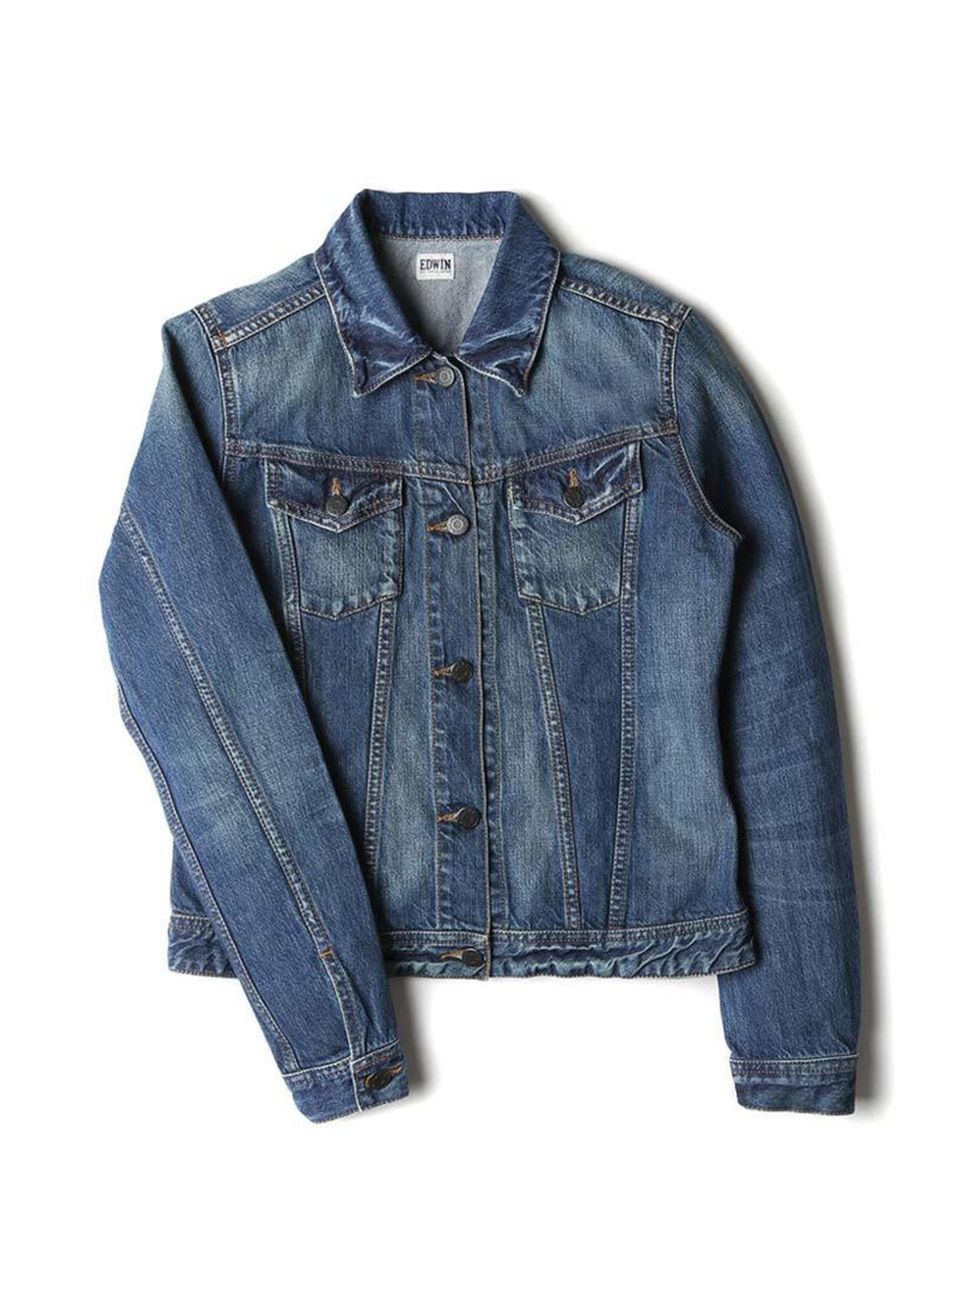 <p>Picture Editor Lara Ferros is a denim-obsessive.</p>

<p>&nbsp;</p>

<p><a href="http://shop.edwin-europe.com/collections/womenswear/products/edwin-womens-chanty-jacket-compact-indigo-denim-blue-mid-used" target="_blank">Edwin</a> jacket, &pound;102</p